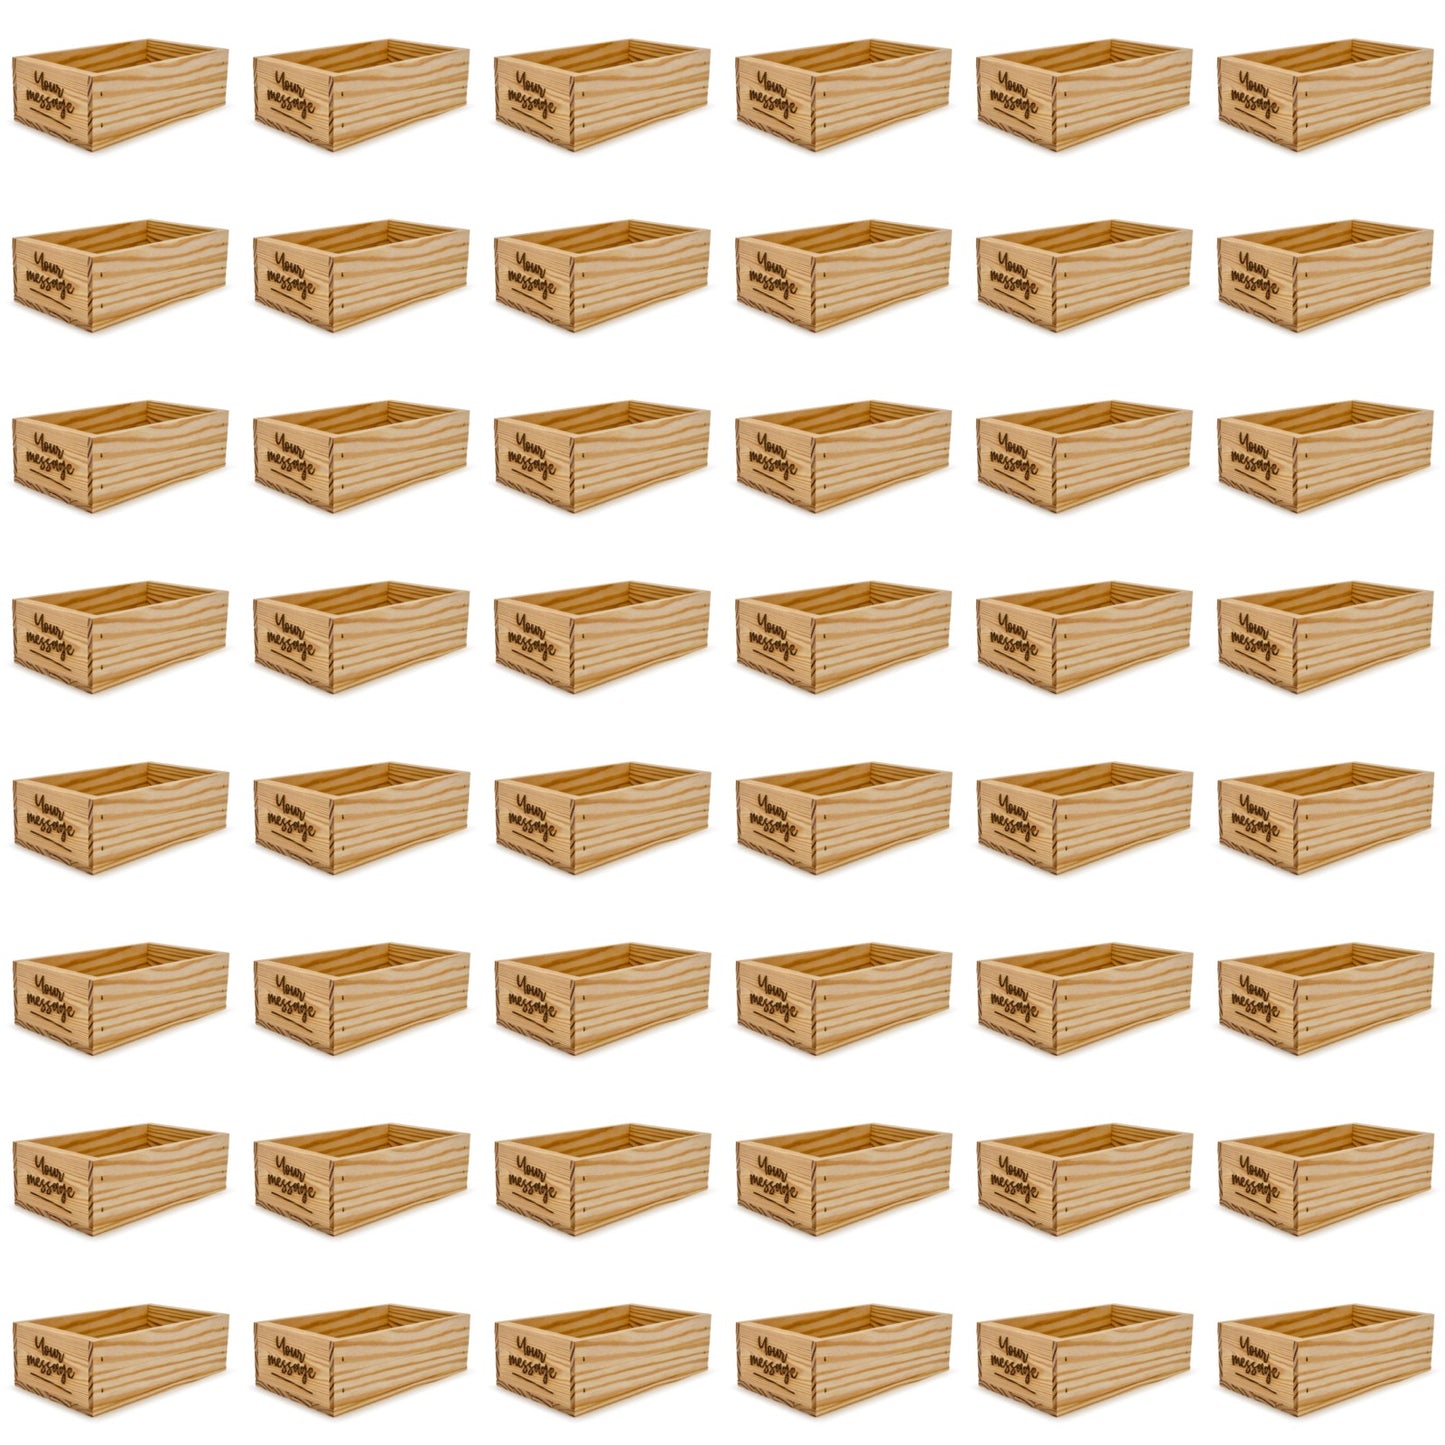 48 Small wooden crates with custom message 11x6.25x3.5